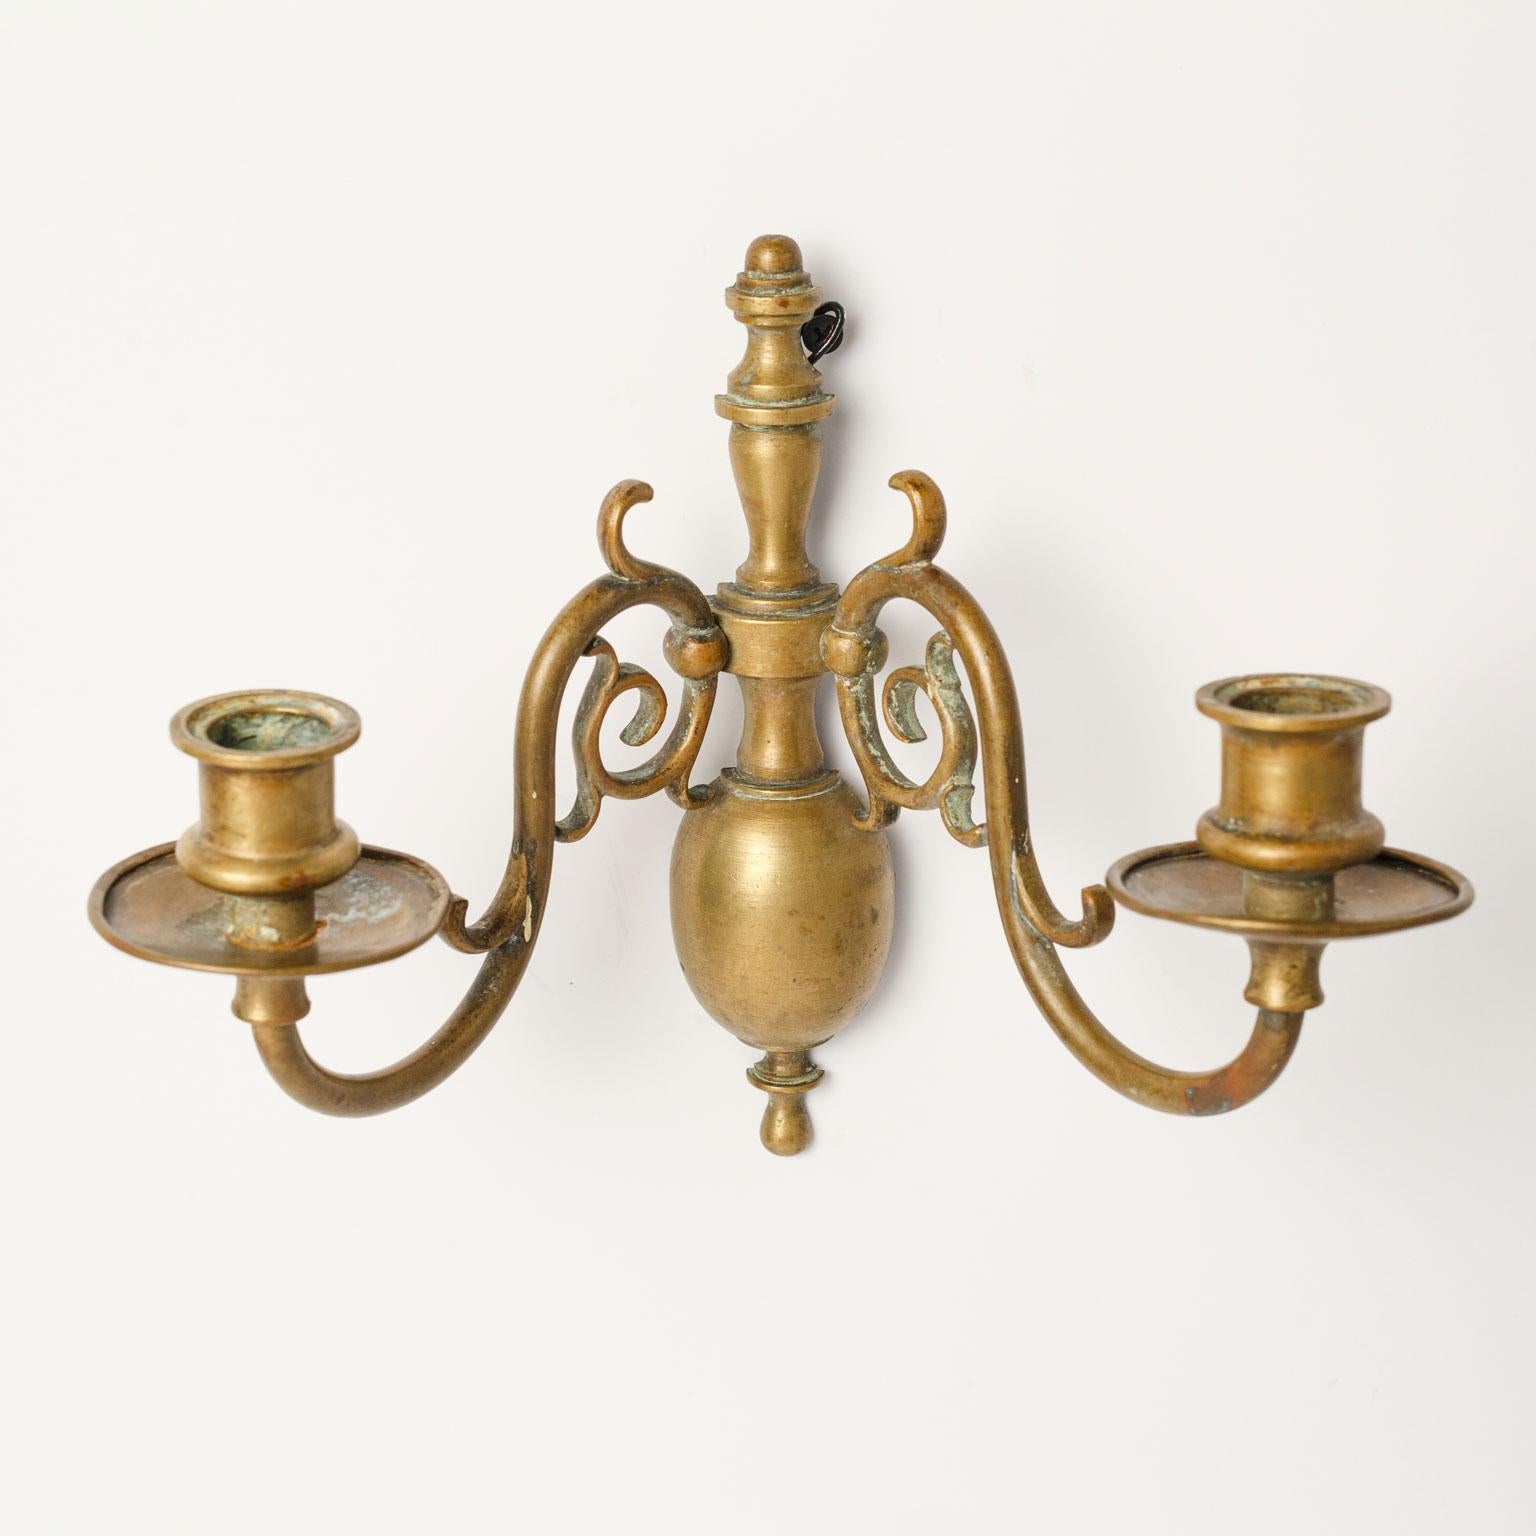 Cast Pair of Smaller-Scale Brass Sconces